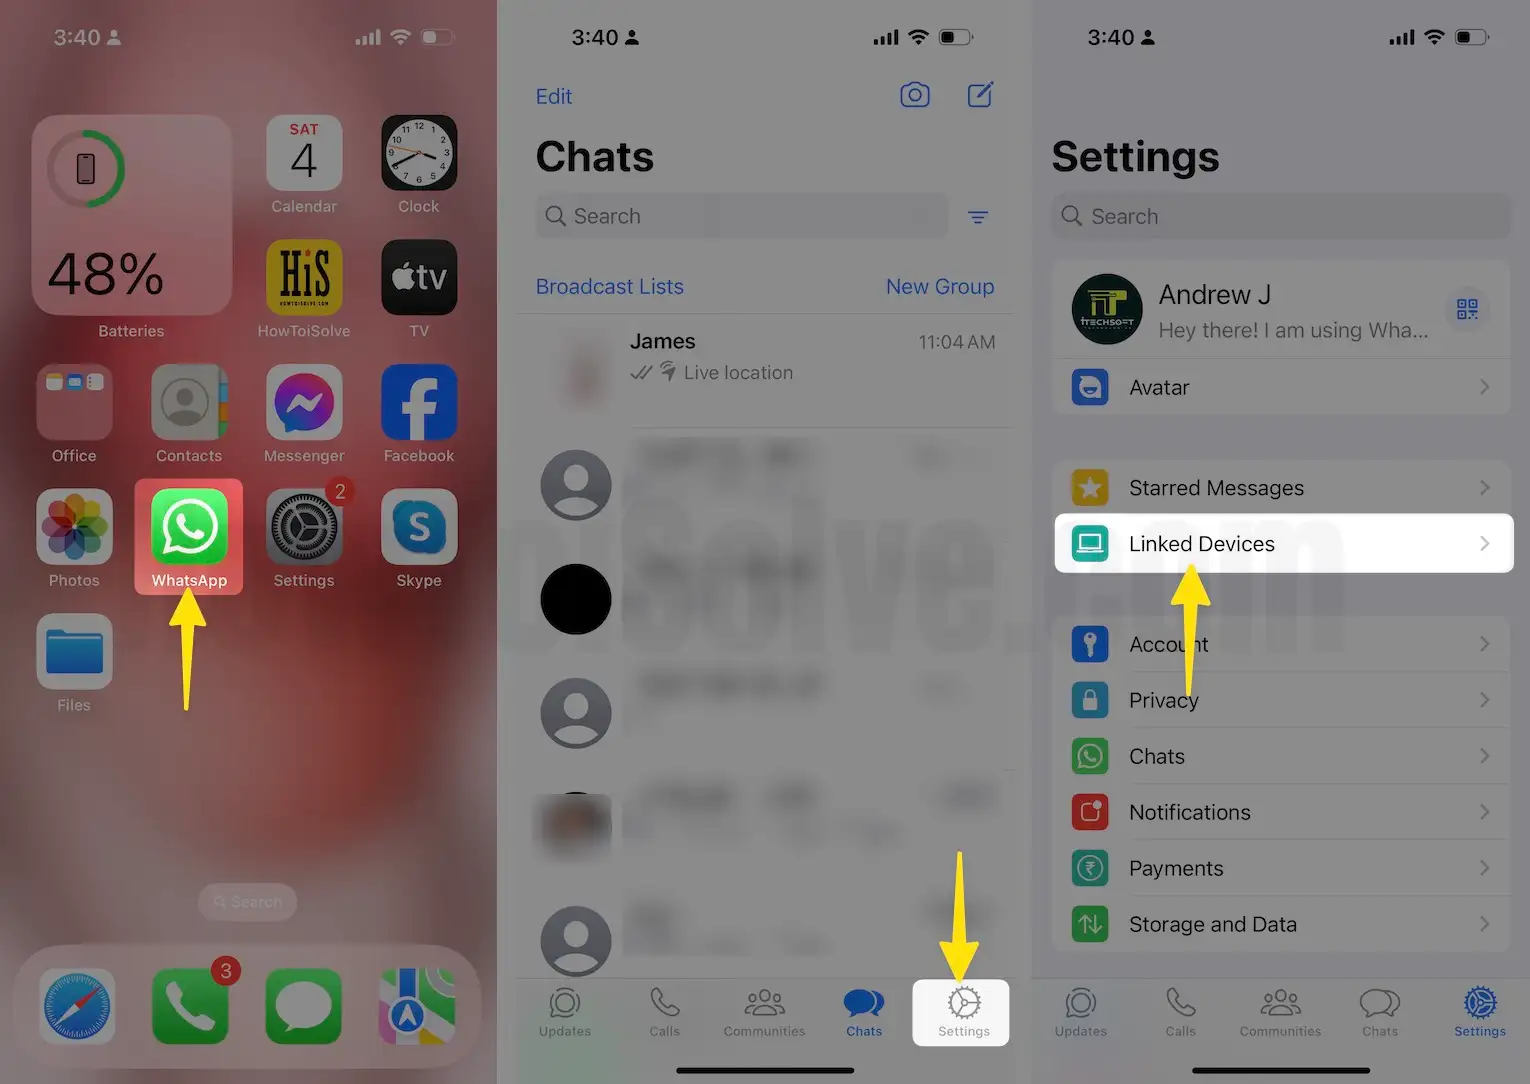 Launch the whatsapp tap on settings then select Linked Devices on iPhone